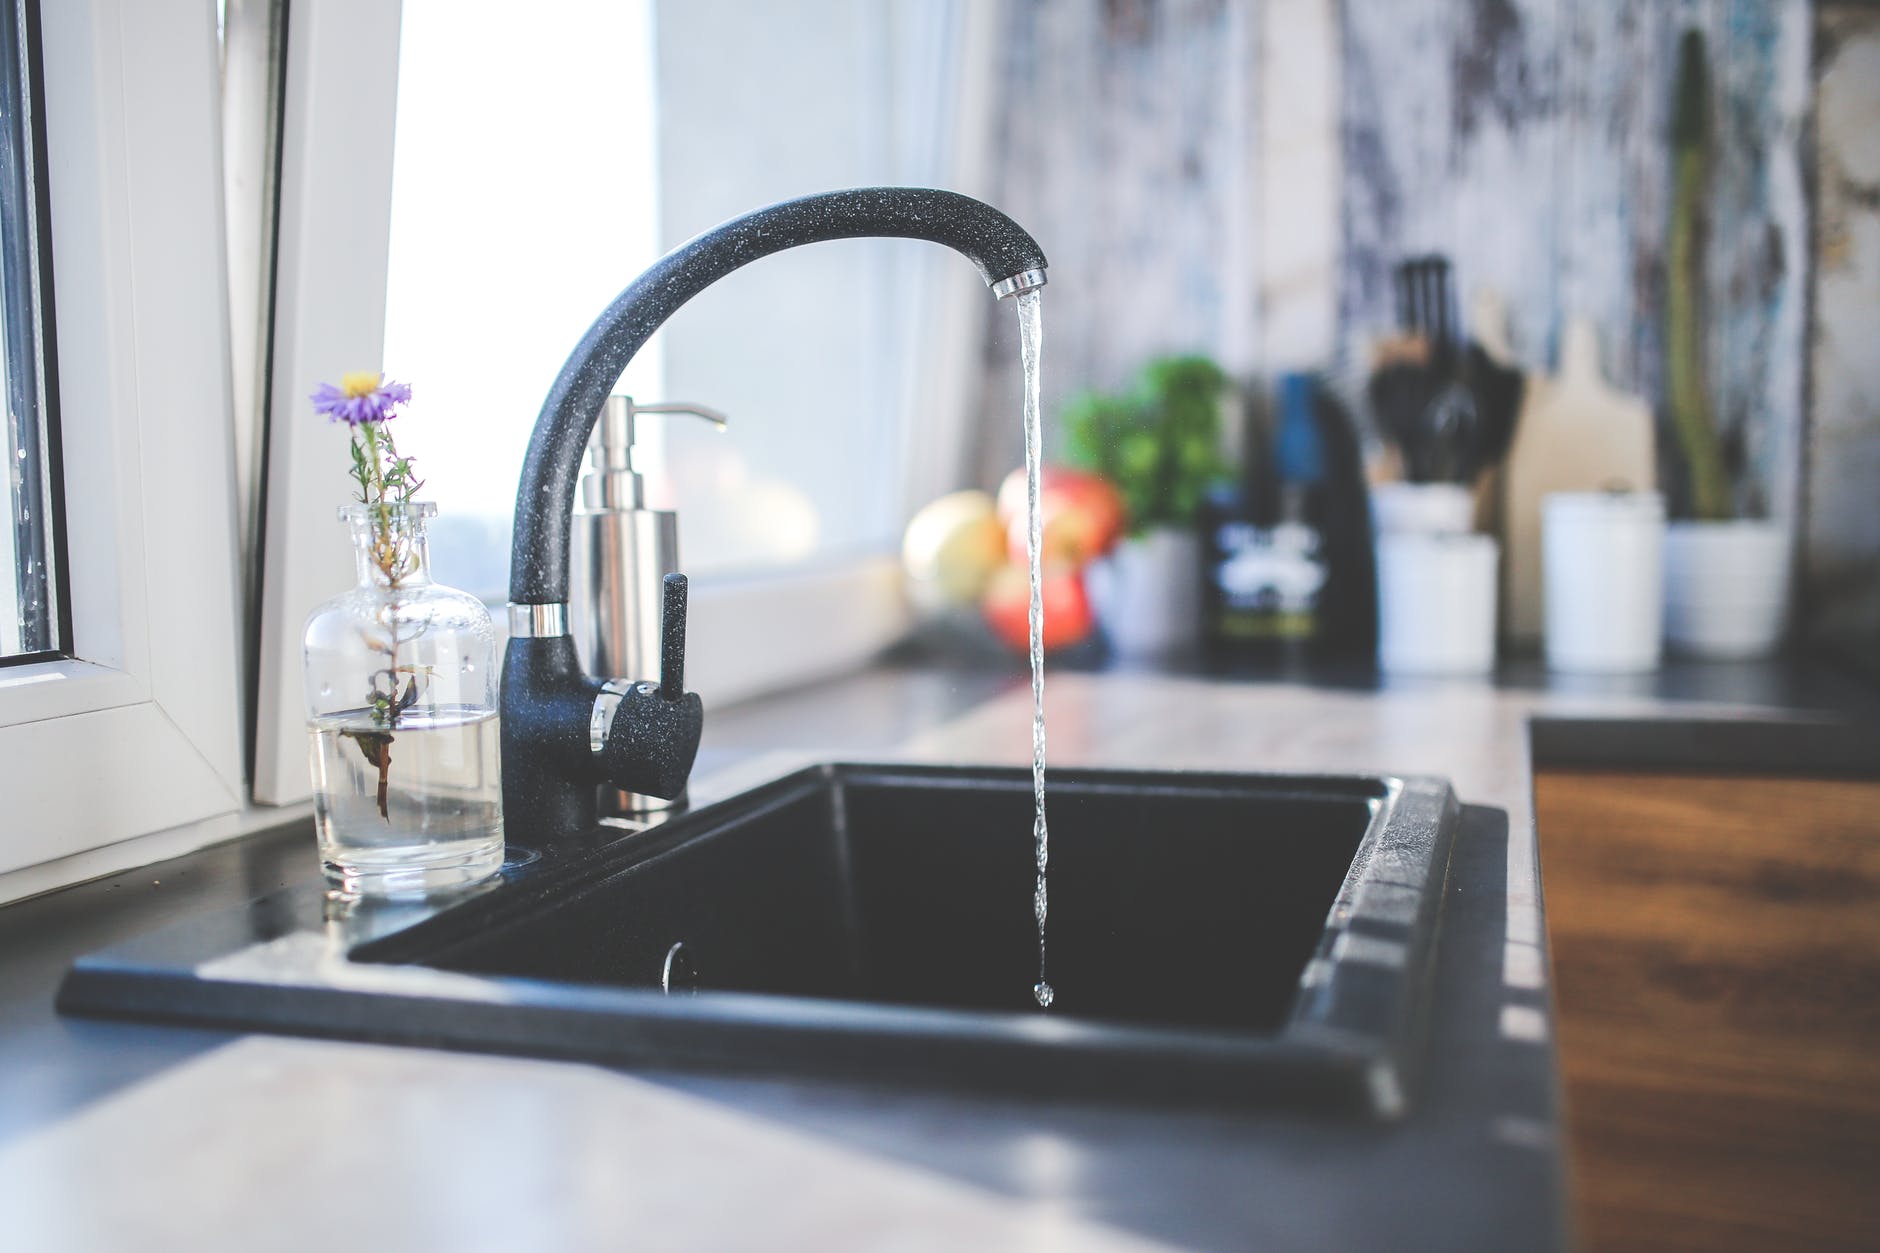 What Are the Main Reasons For Low Water Pressure In Your Home? Learn From The Experts